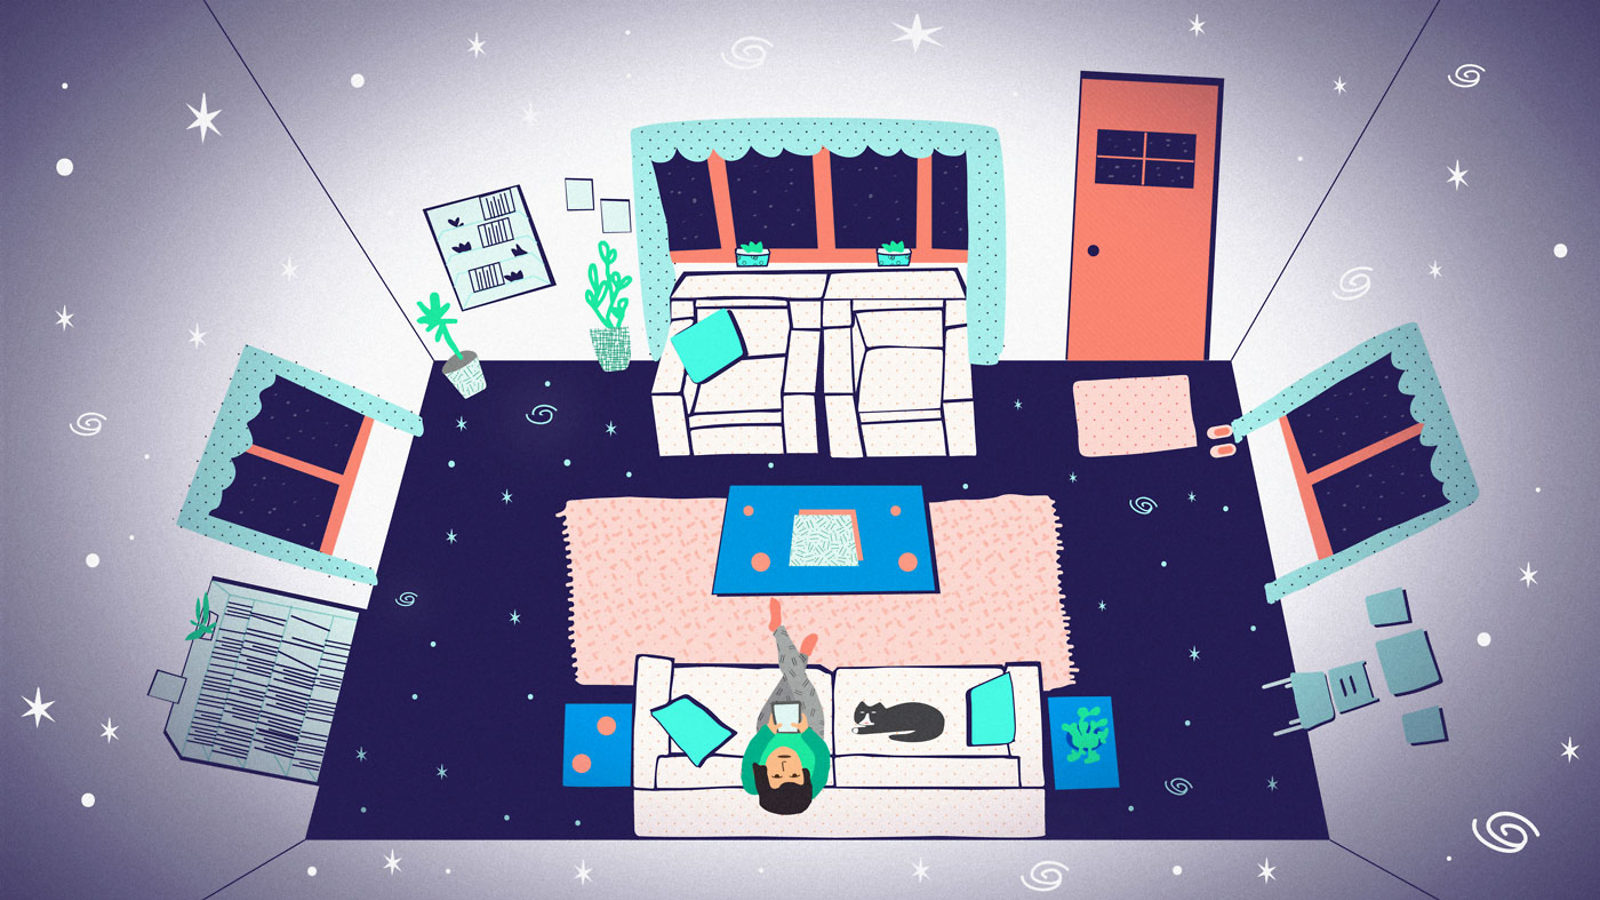 Illustration of arial view of living room with stars and galaxies on ceiling 